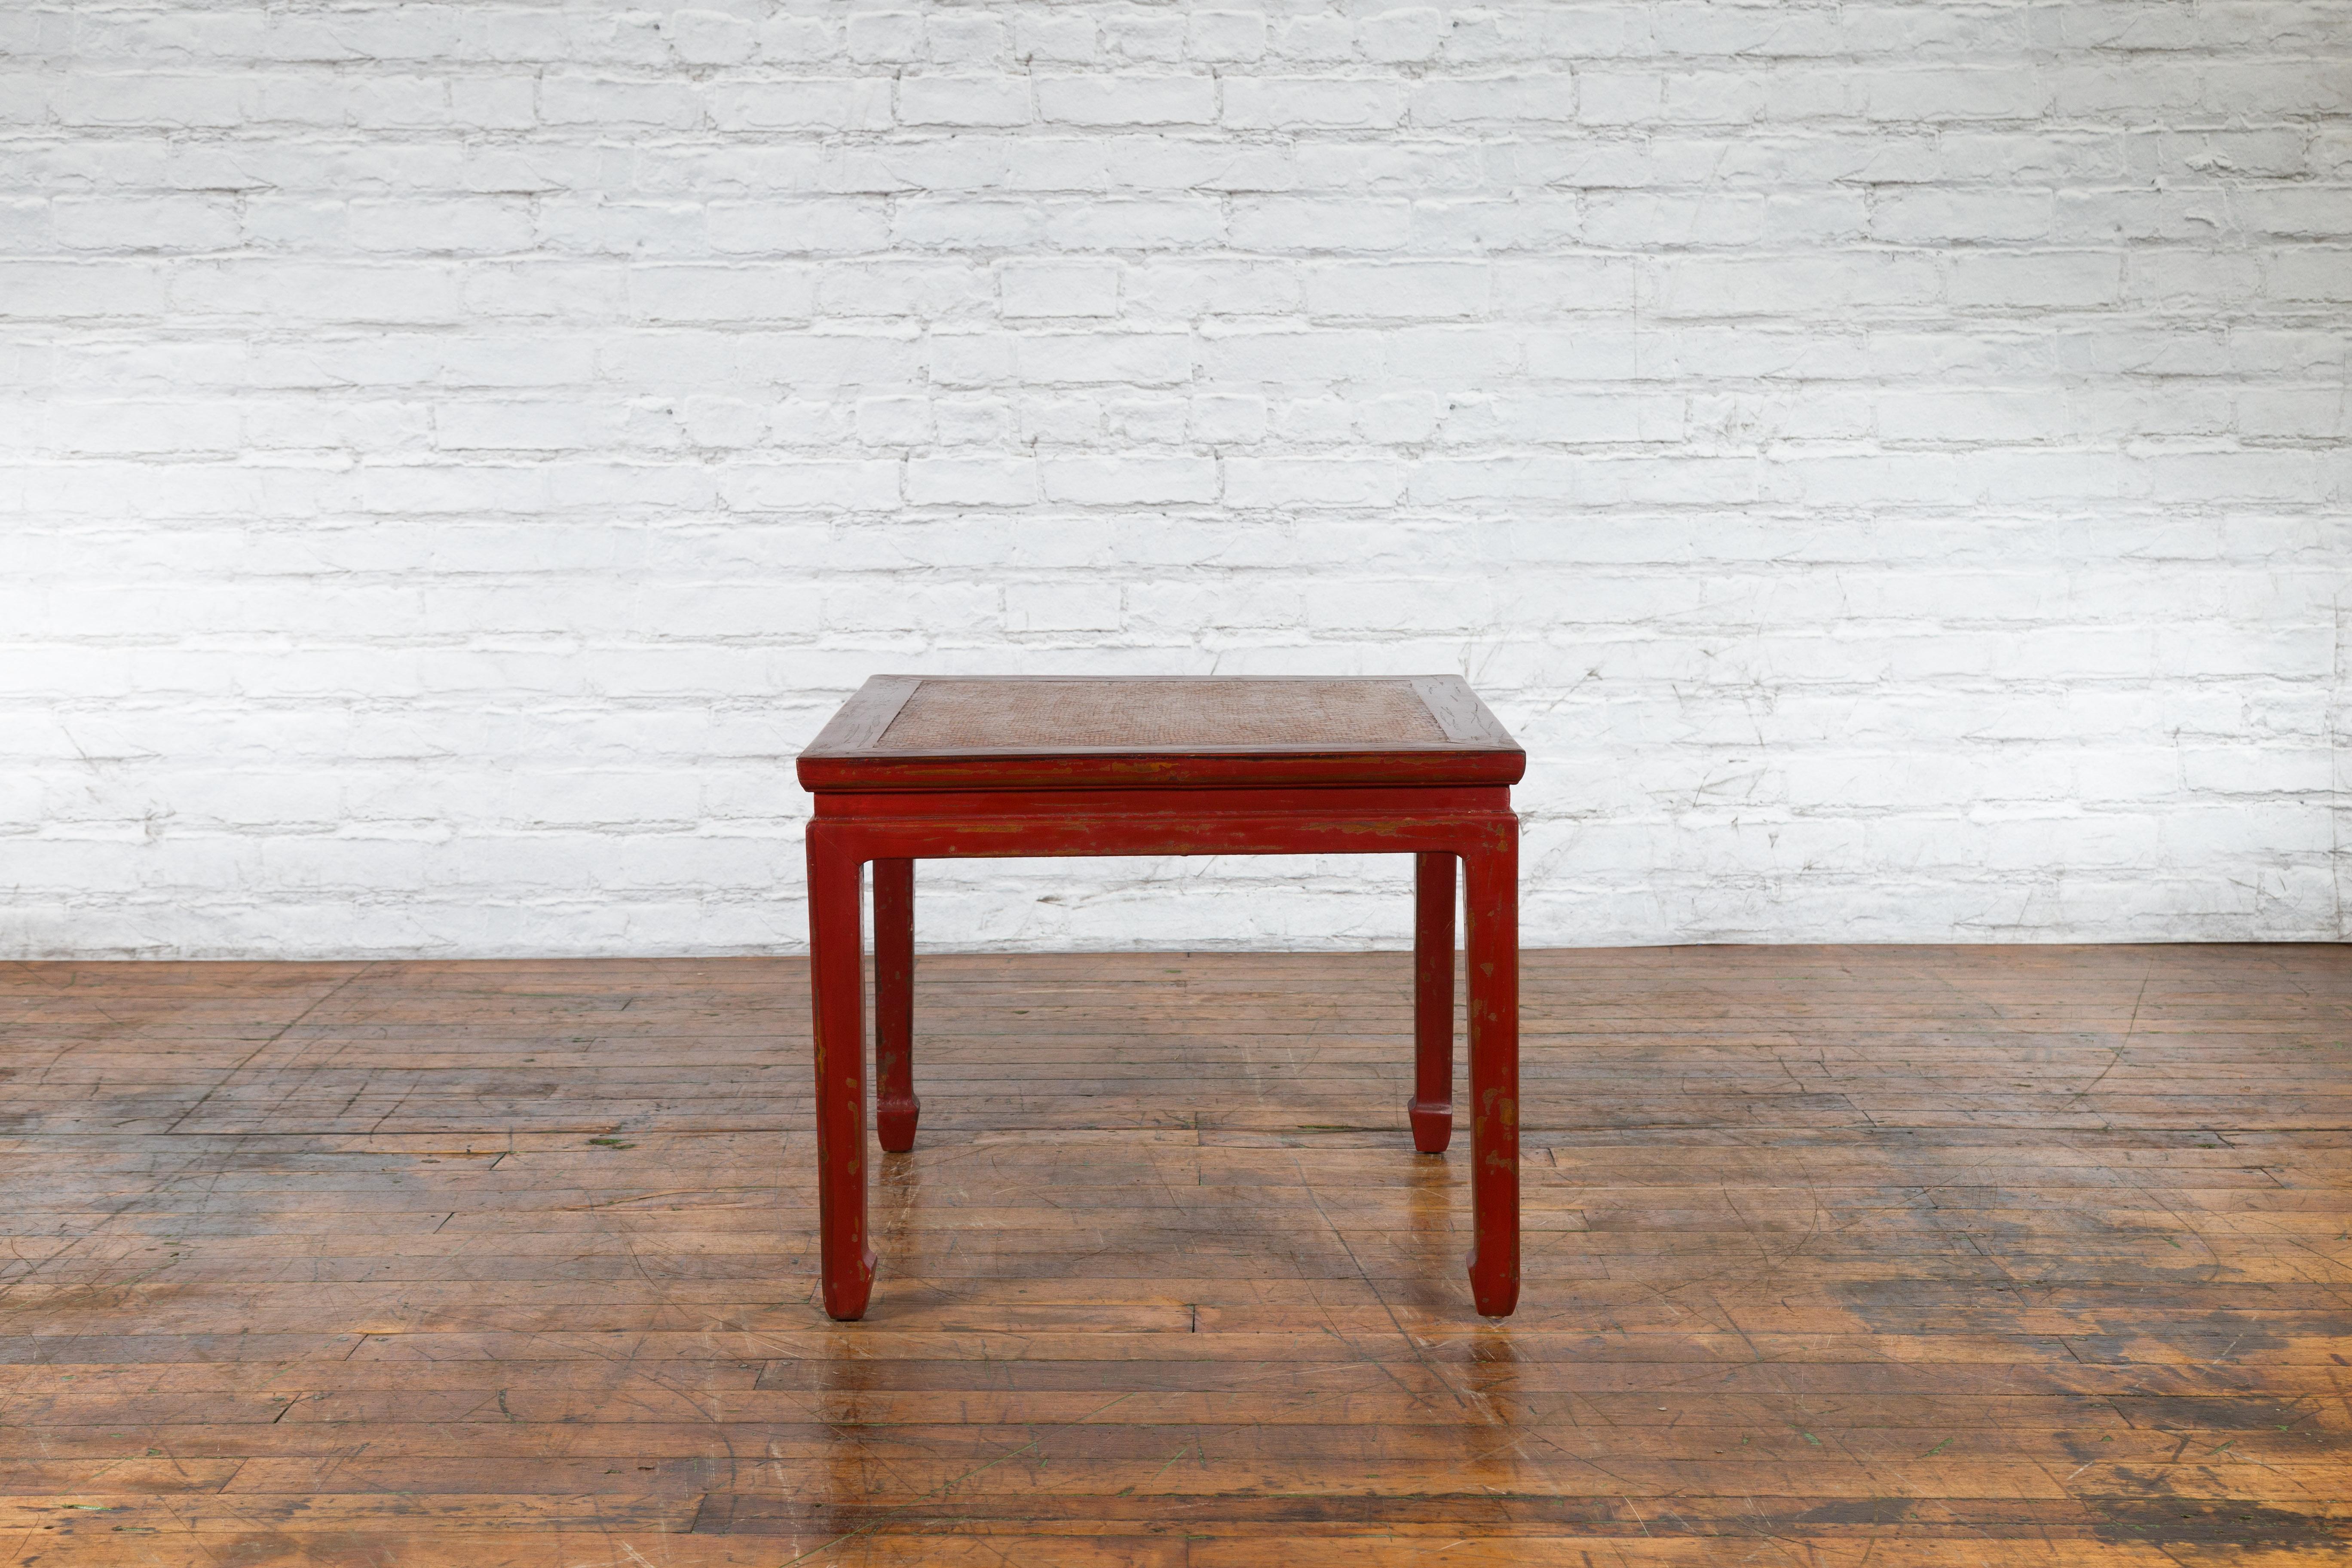 Chinese Qing Dynasty 19th Century Red Lacquer Side Table with Woven Rattan Top For Sale 1